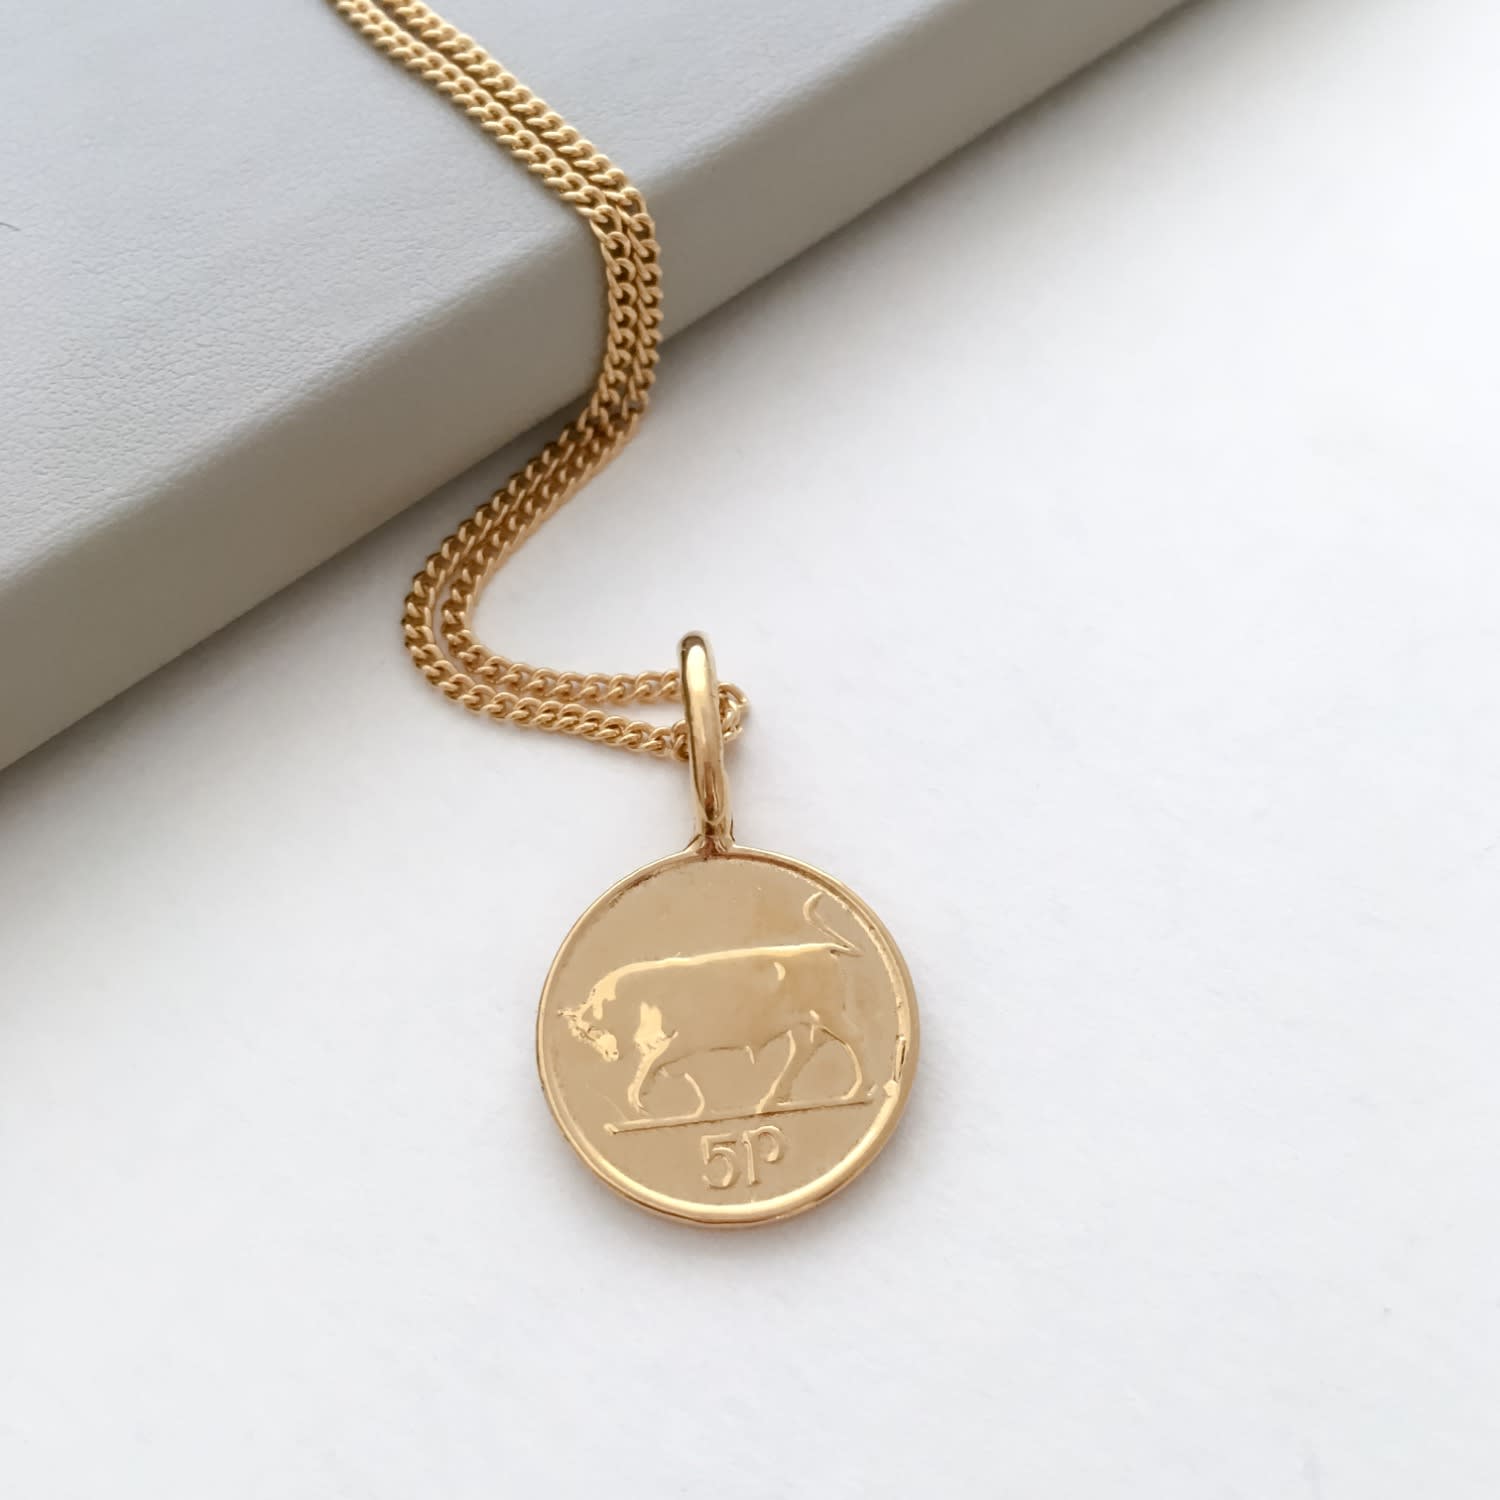 Ireland 6 pence coin necklace